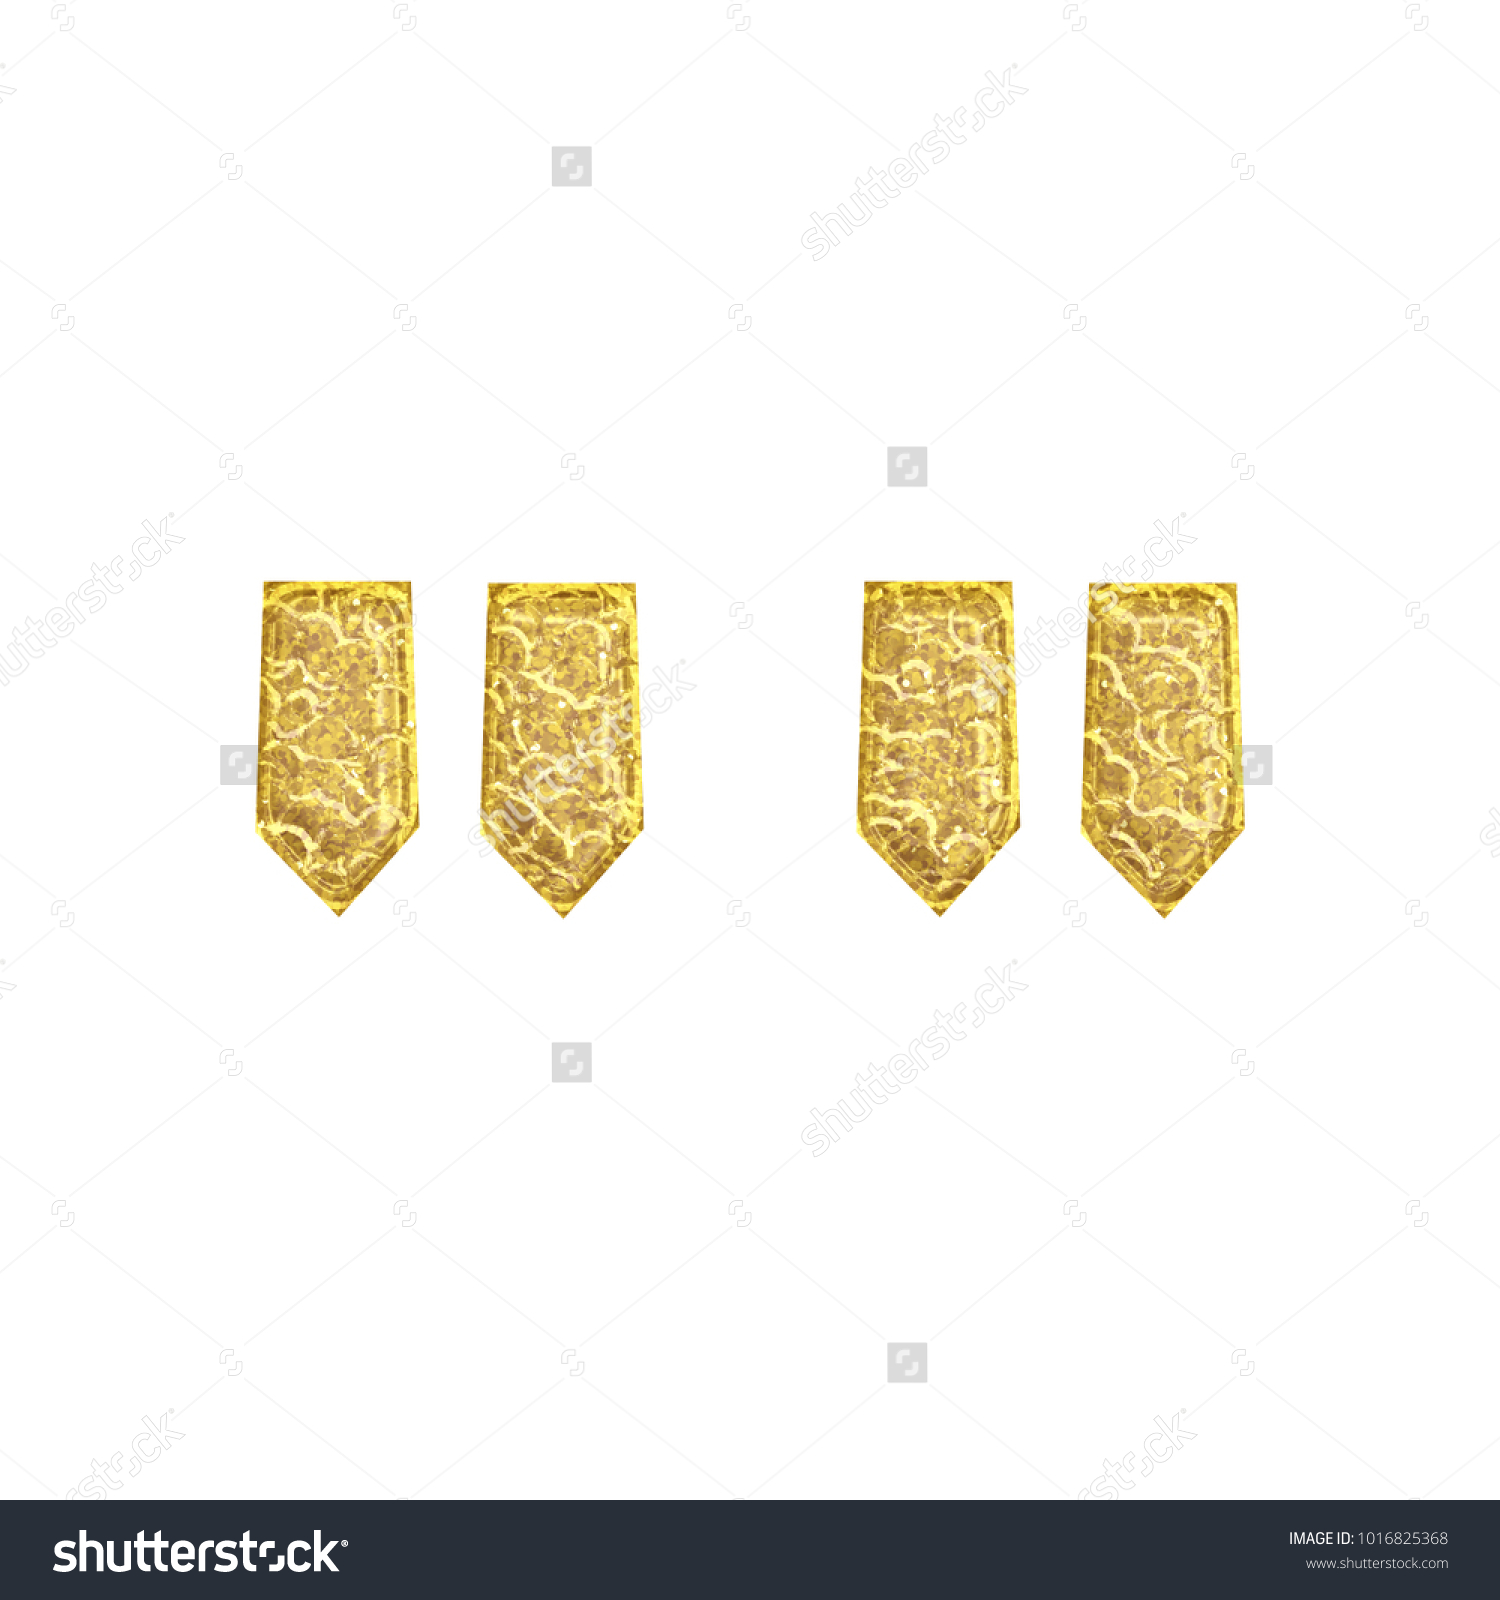 Aged Gold Rough Cracked Golden Double Stock Illustration 1016825368 ...